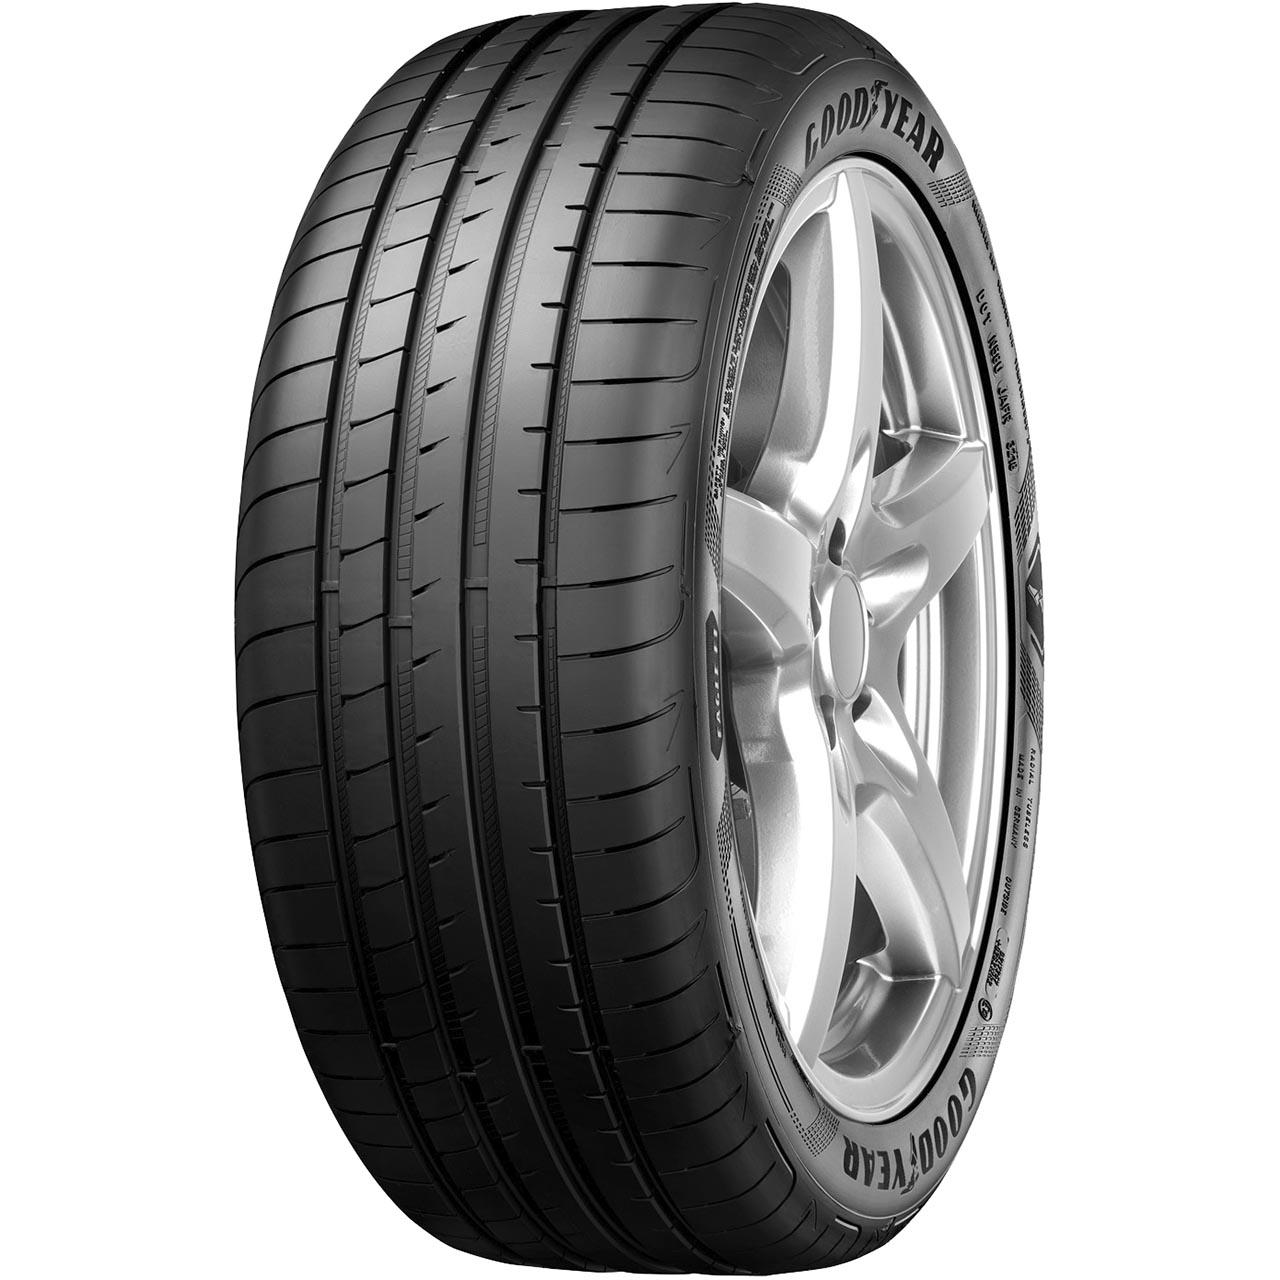 Gomme Nuove Goodyear 235/55 R18 100H EAGF1AS5 pneumatici nuovi Estivo